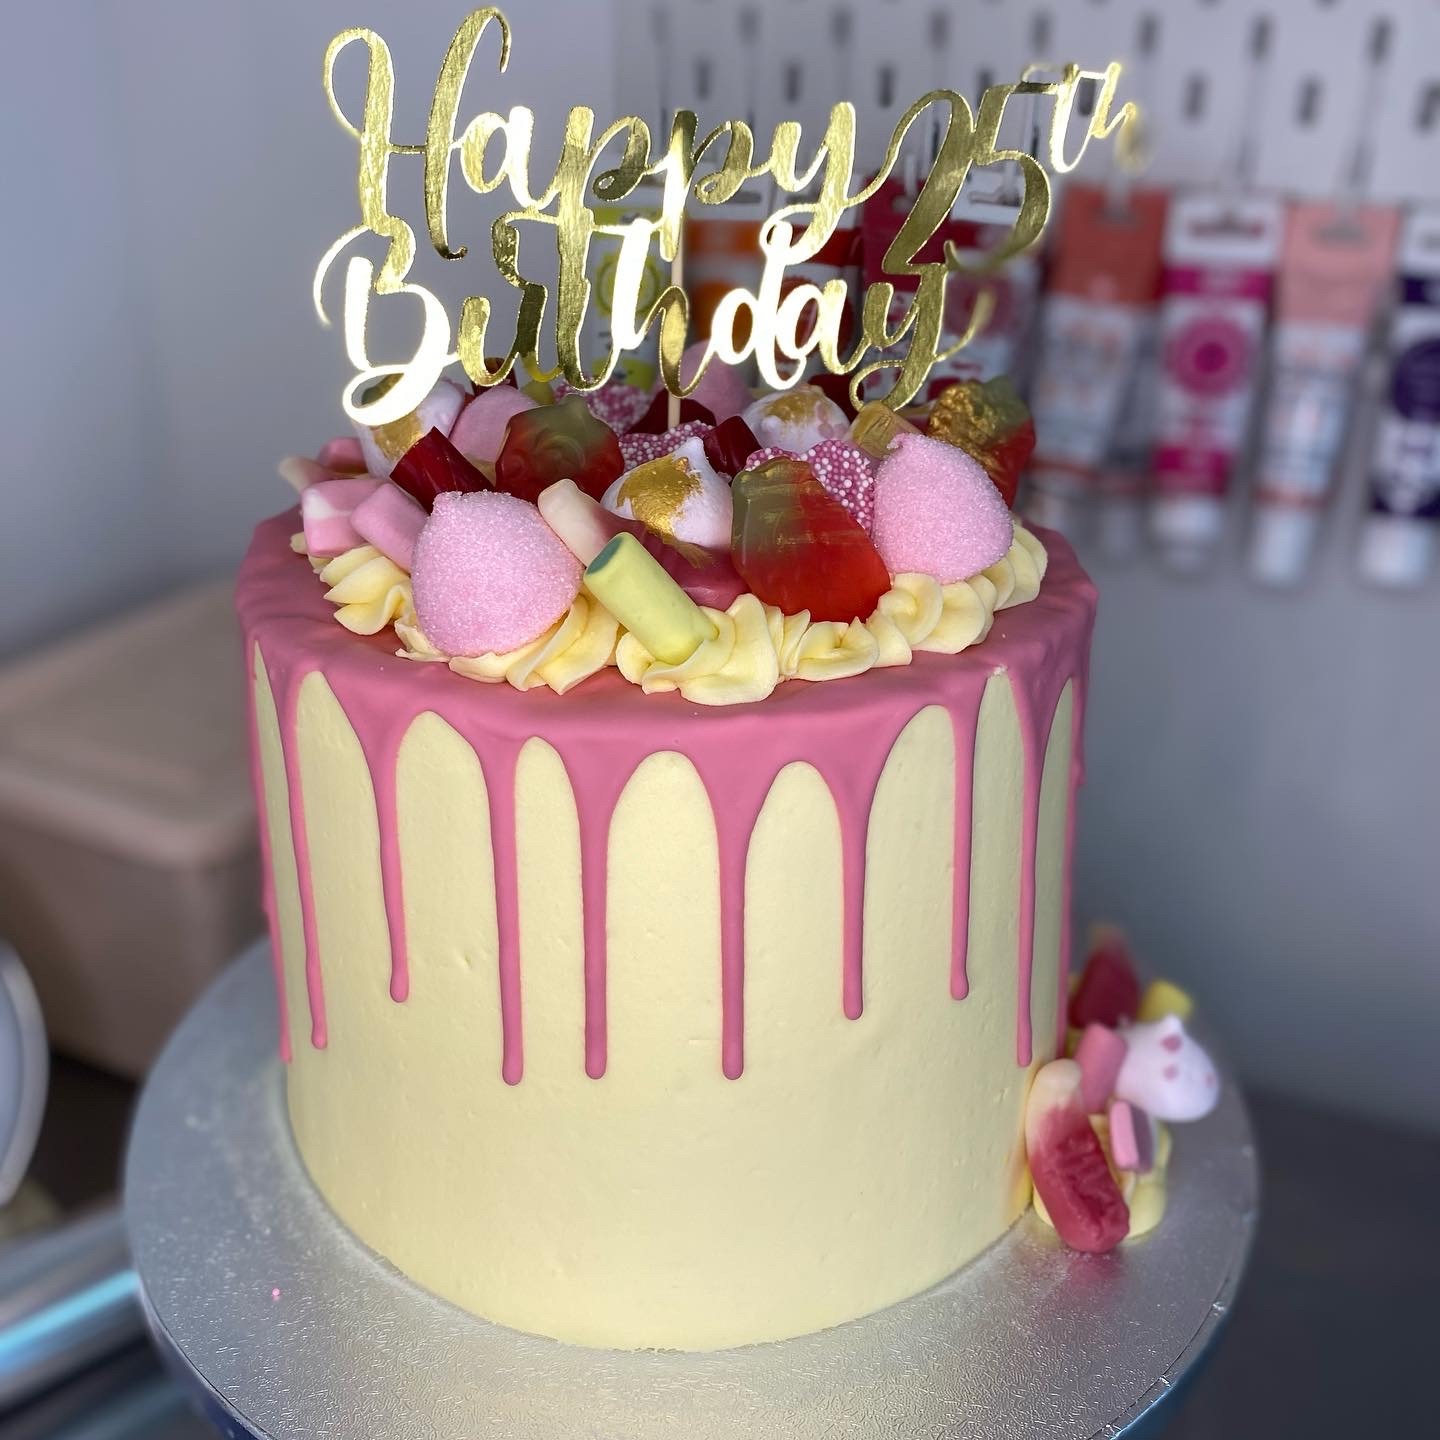 Online Cake Order - Pink & Gold Drip Cake #6Drip – Michael Angelo's